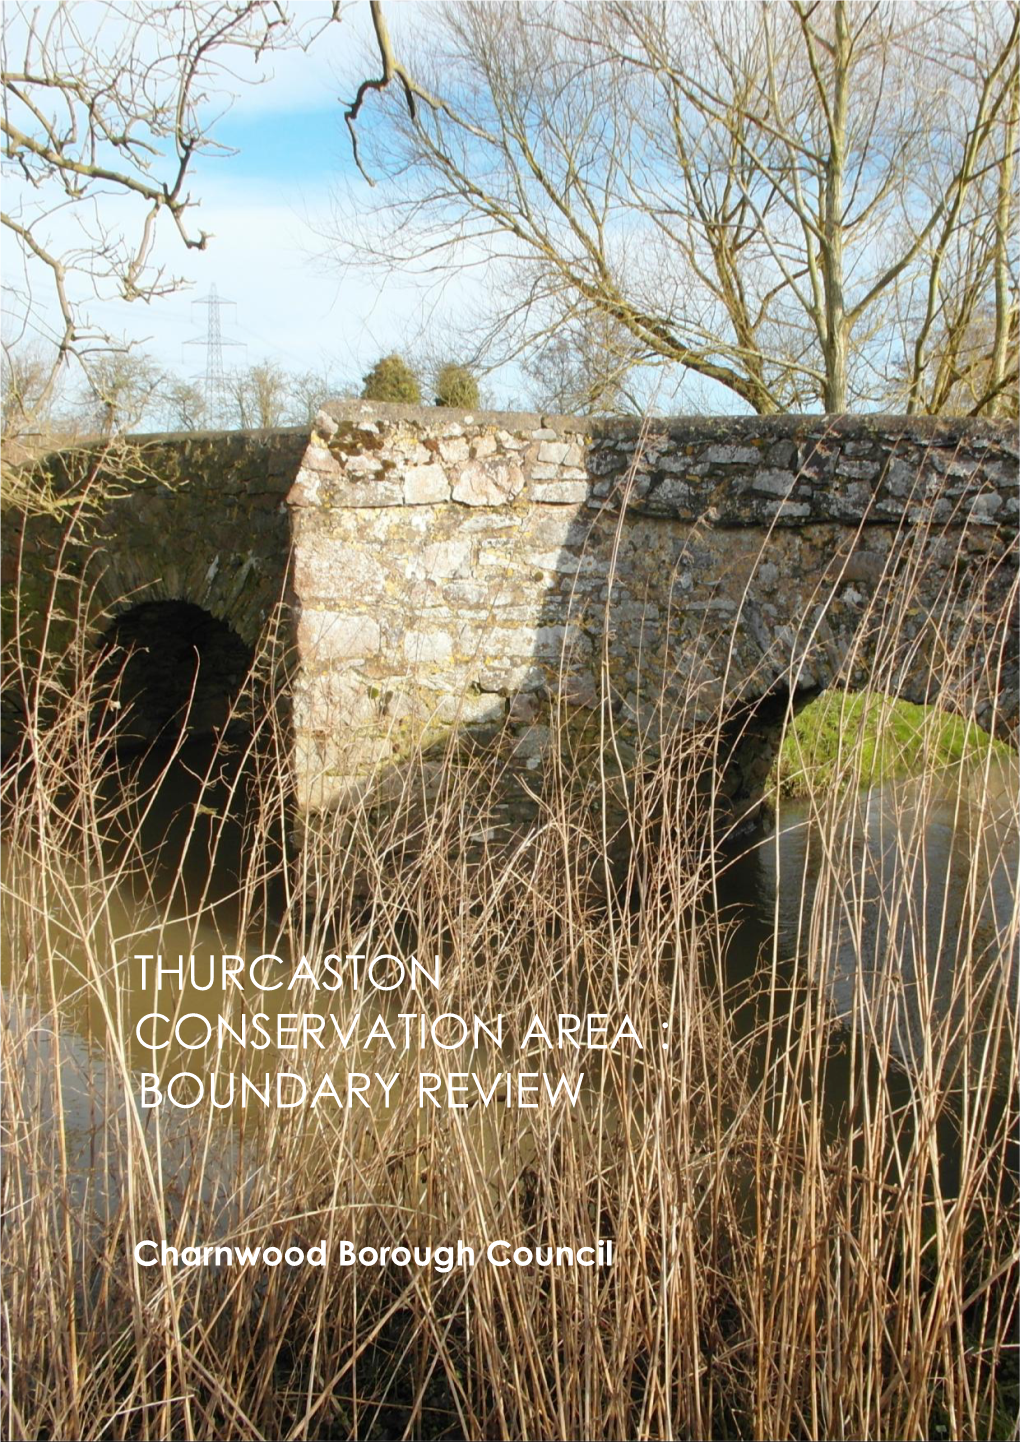 Thurcaston Conservation Area : Boundary Review